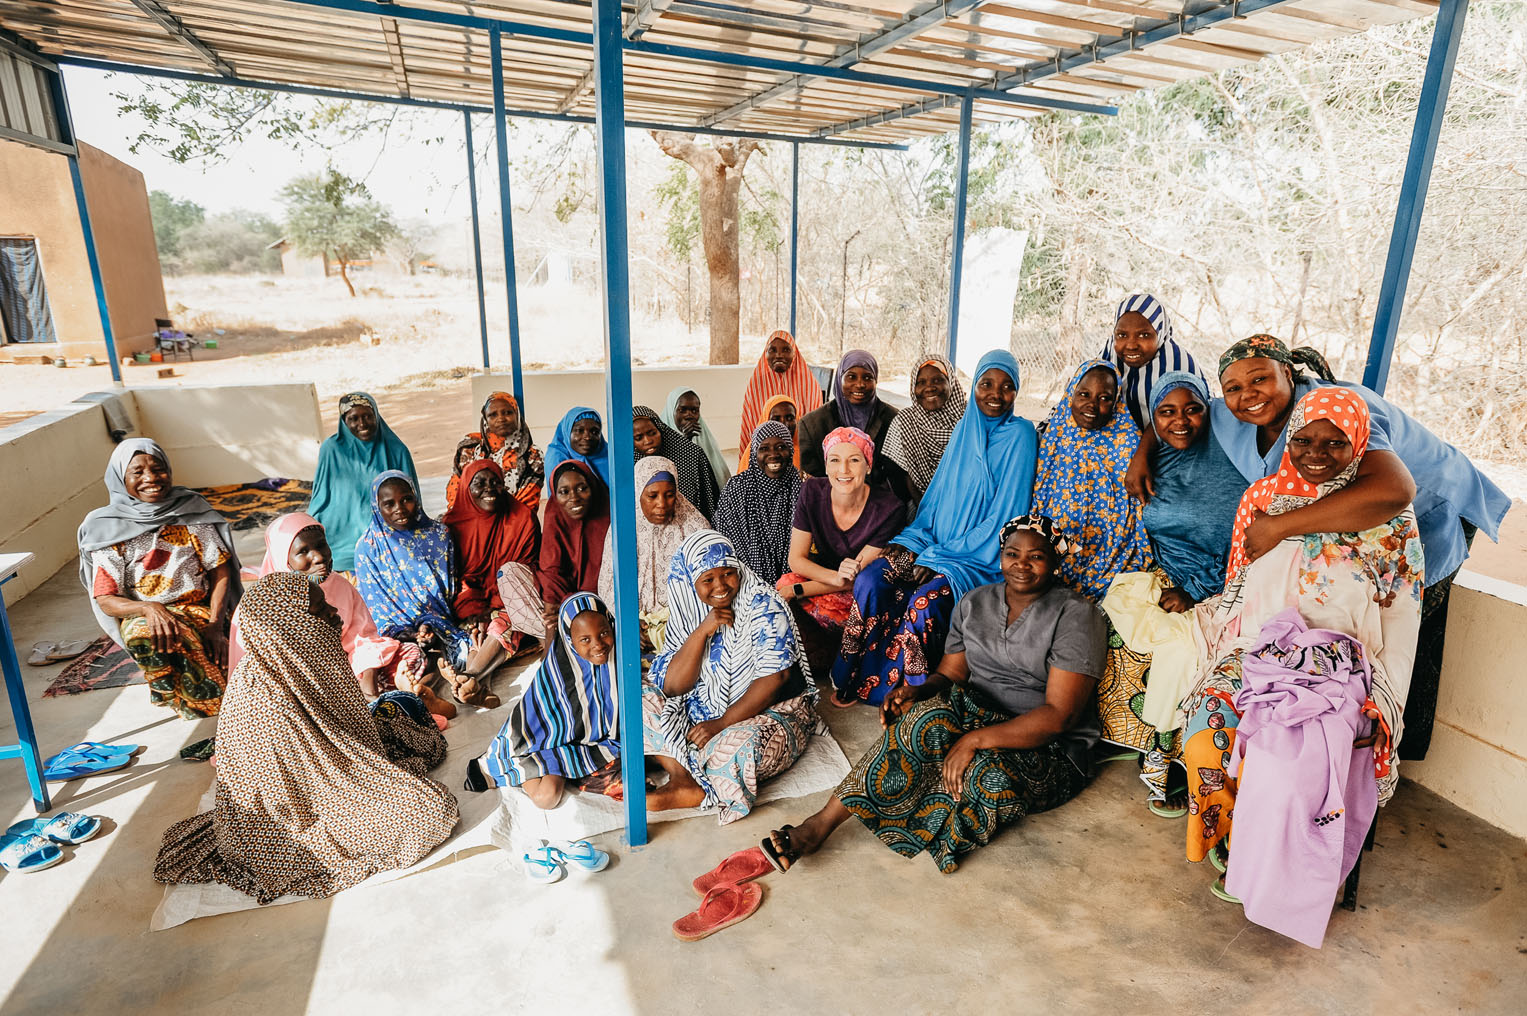 Patients, medical staff, and families gather to celebrate the gift of specialty surgery otherwise unattainable in remote areas of Niger.